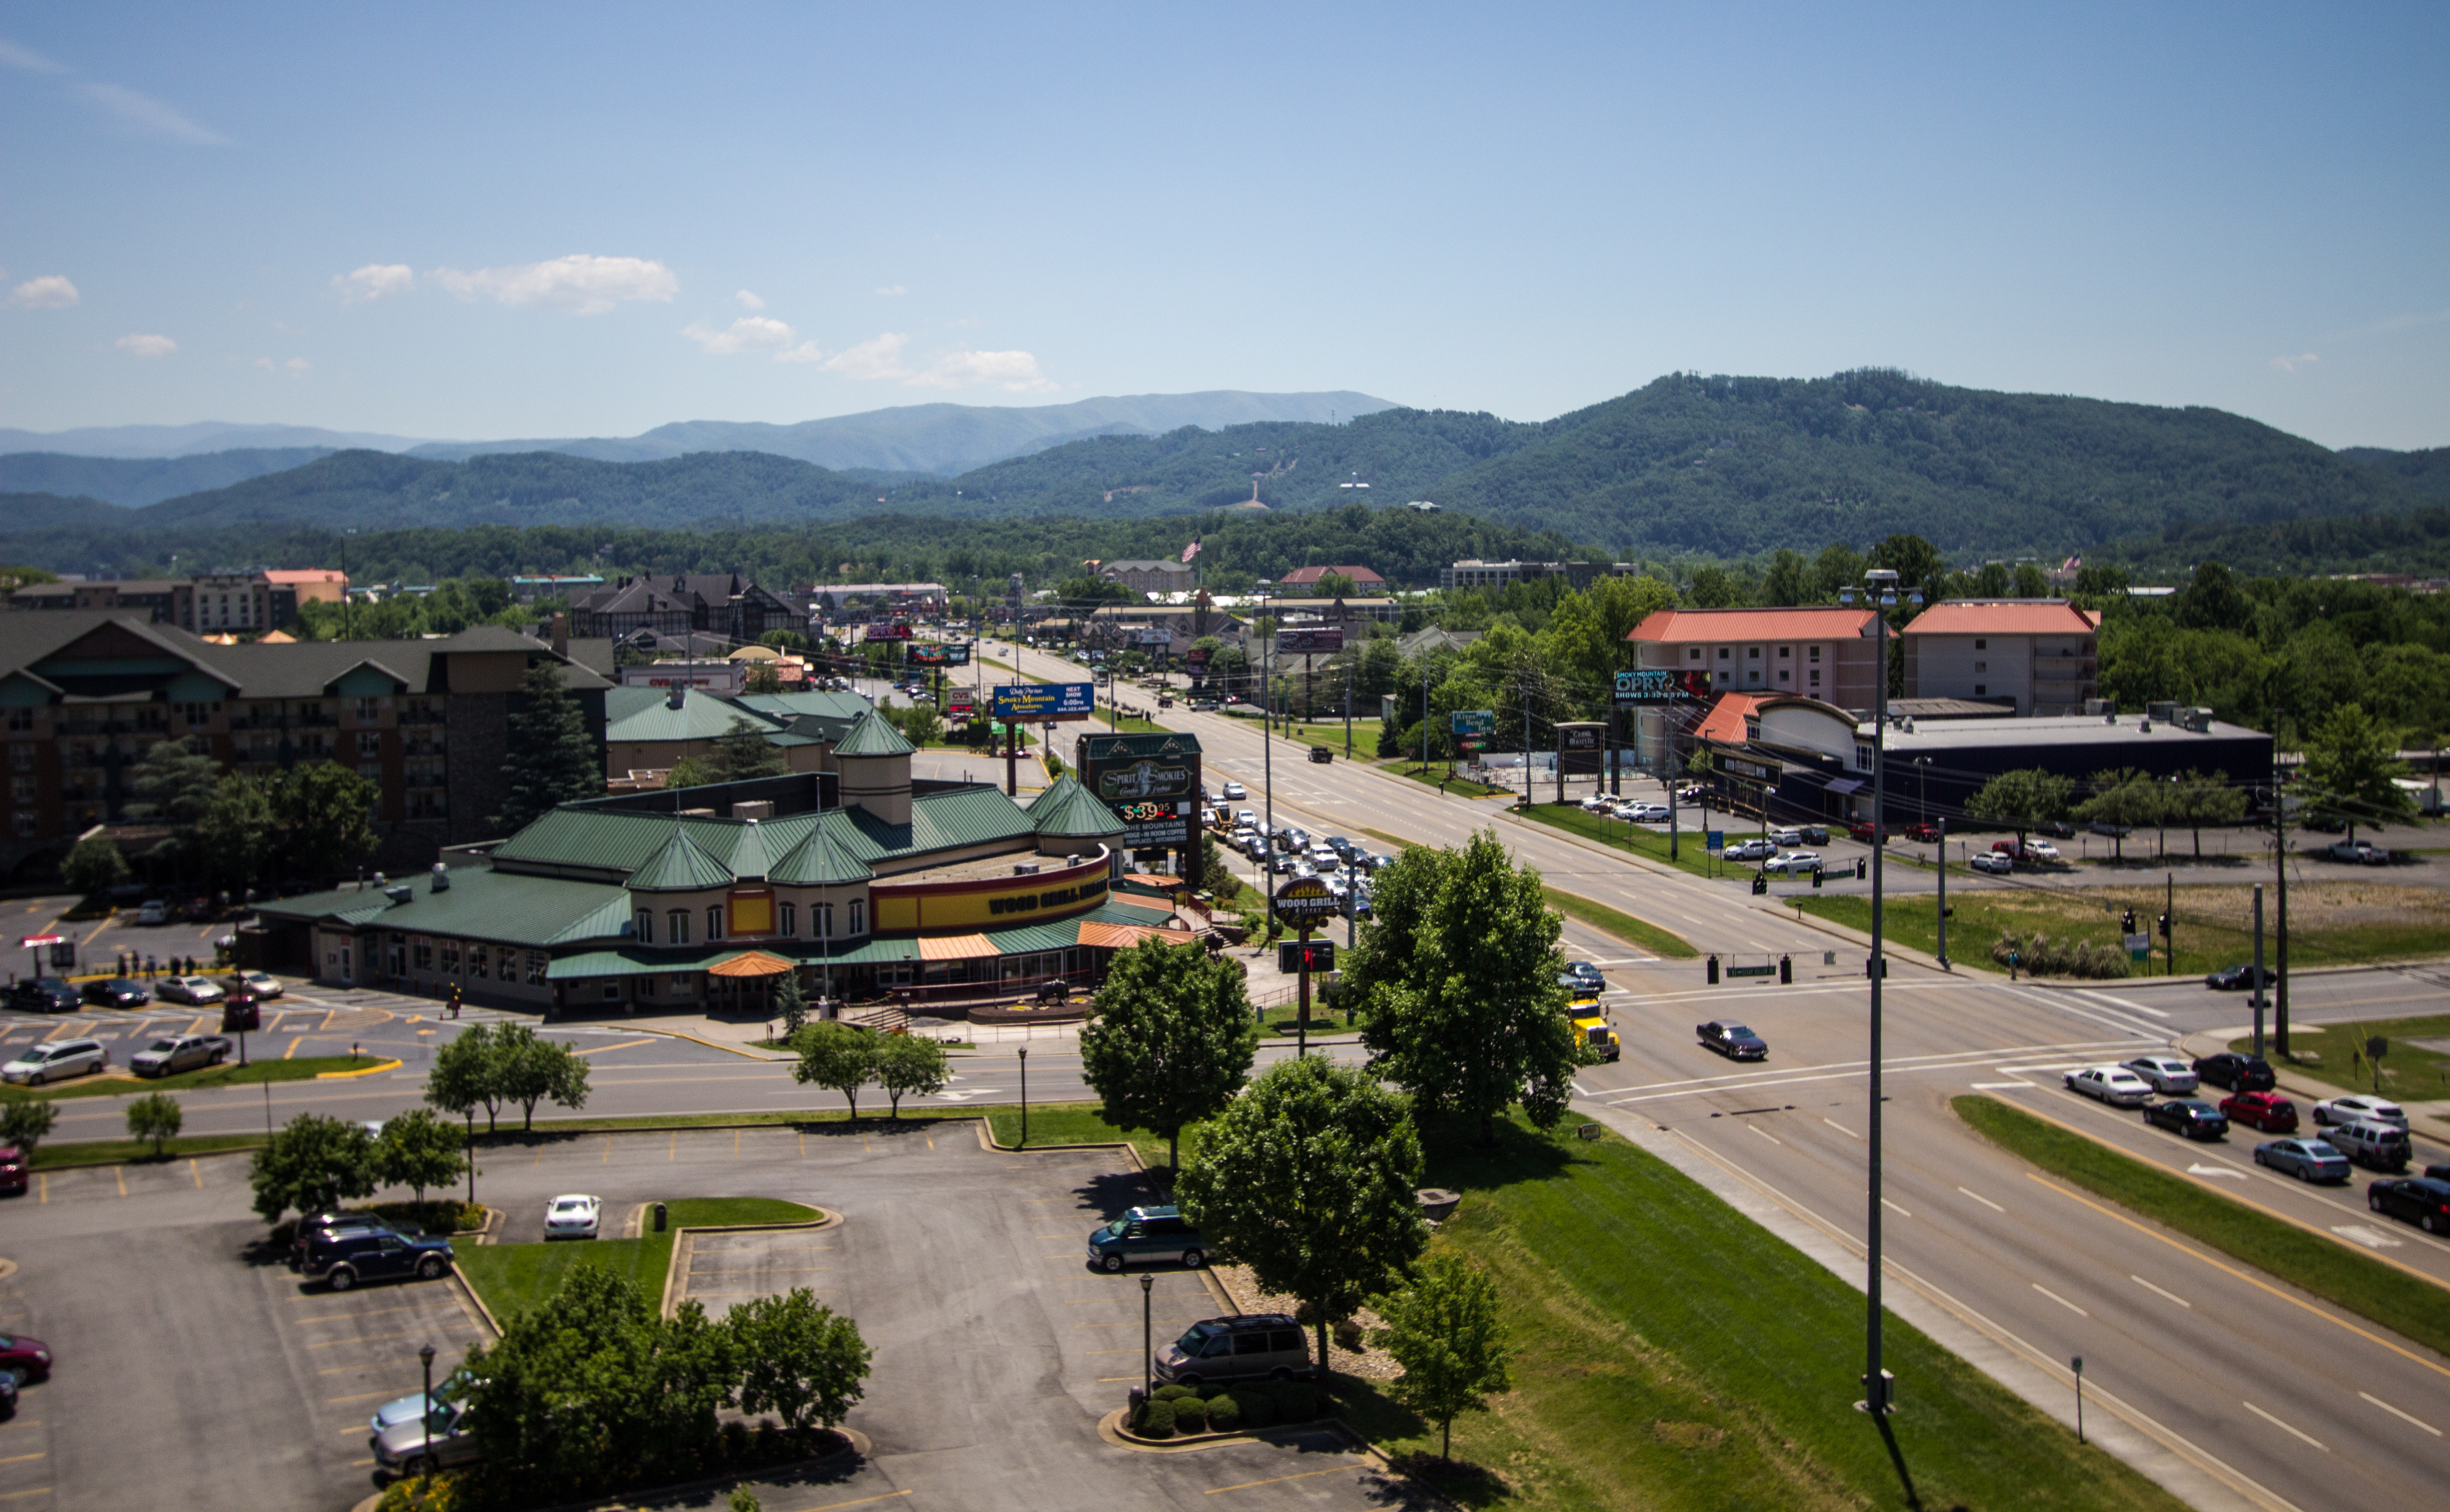 The main parkway in Pigeon Forge from an aerial view with mountains in the background